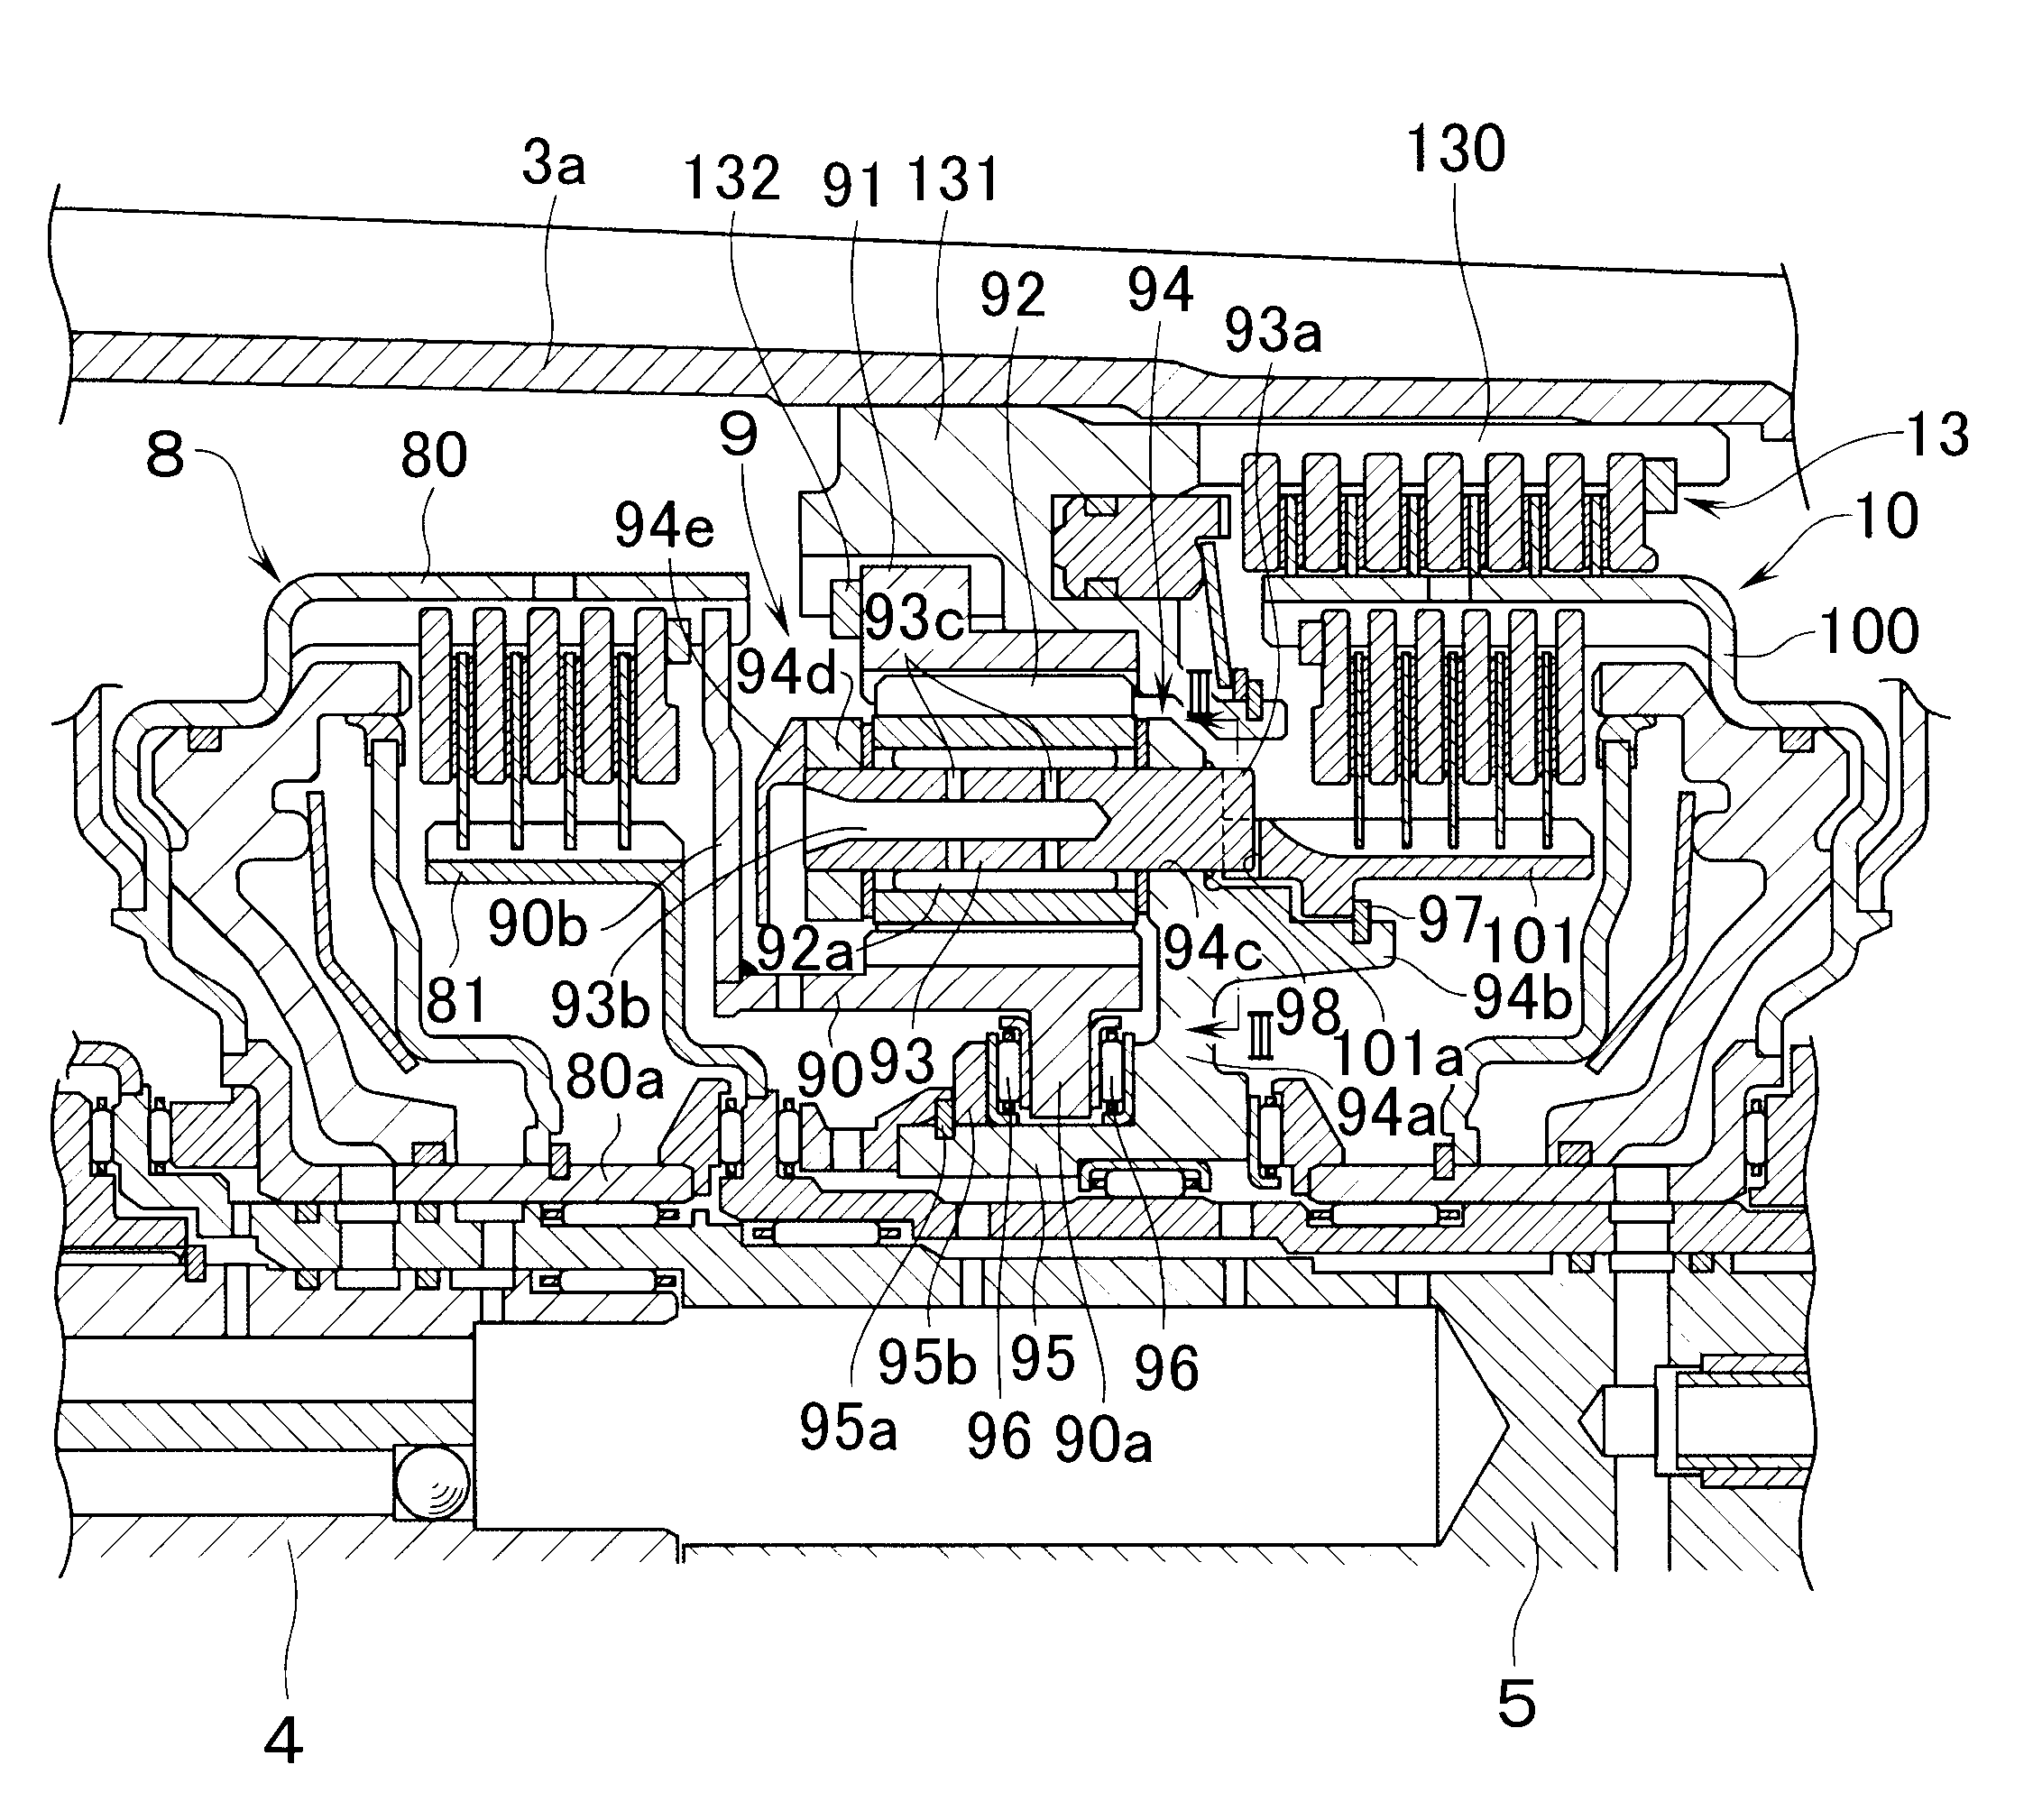 Transmission equipped with planetary gear mechanism and planetary gear mechanism